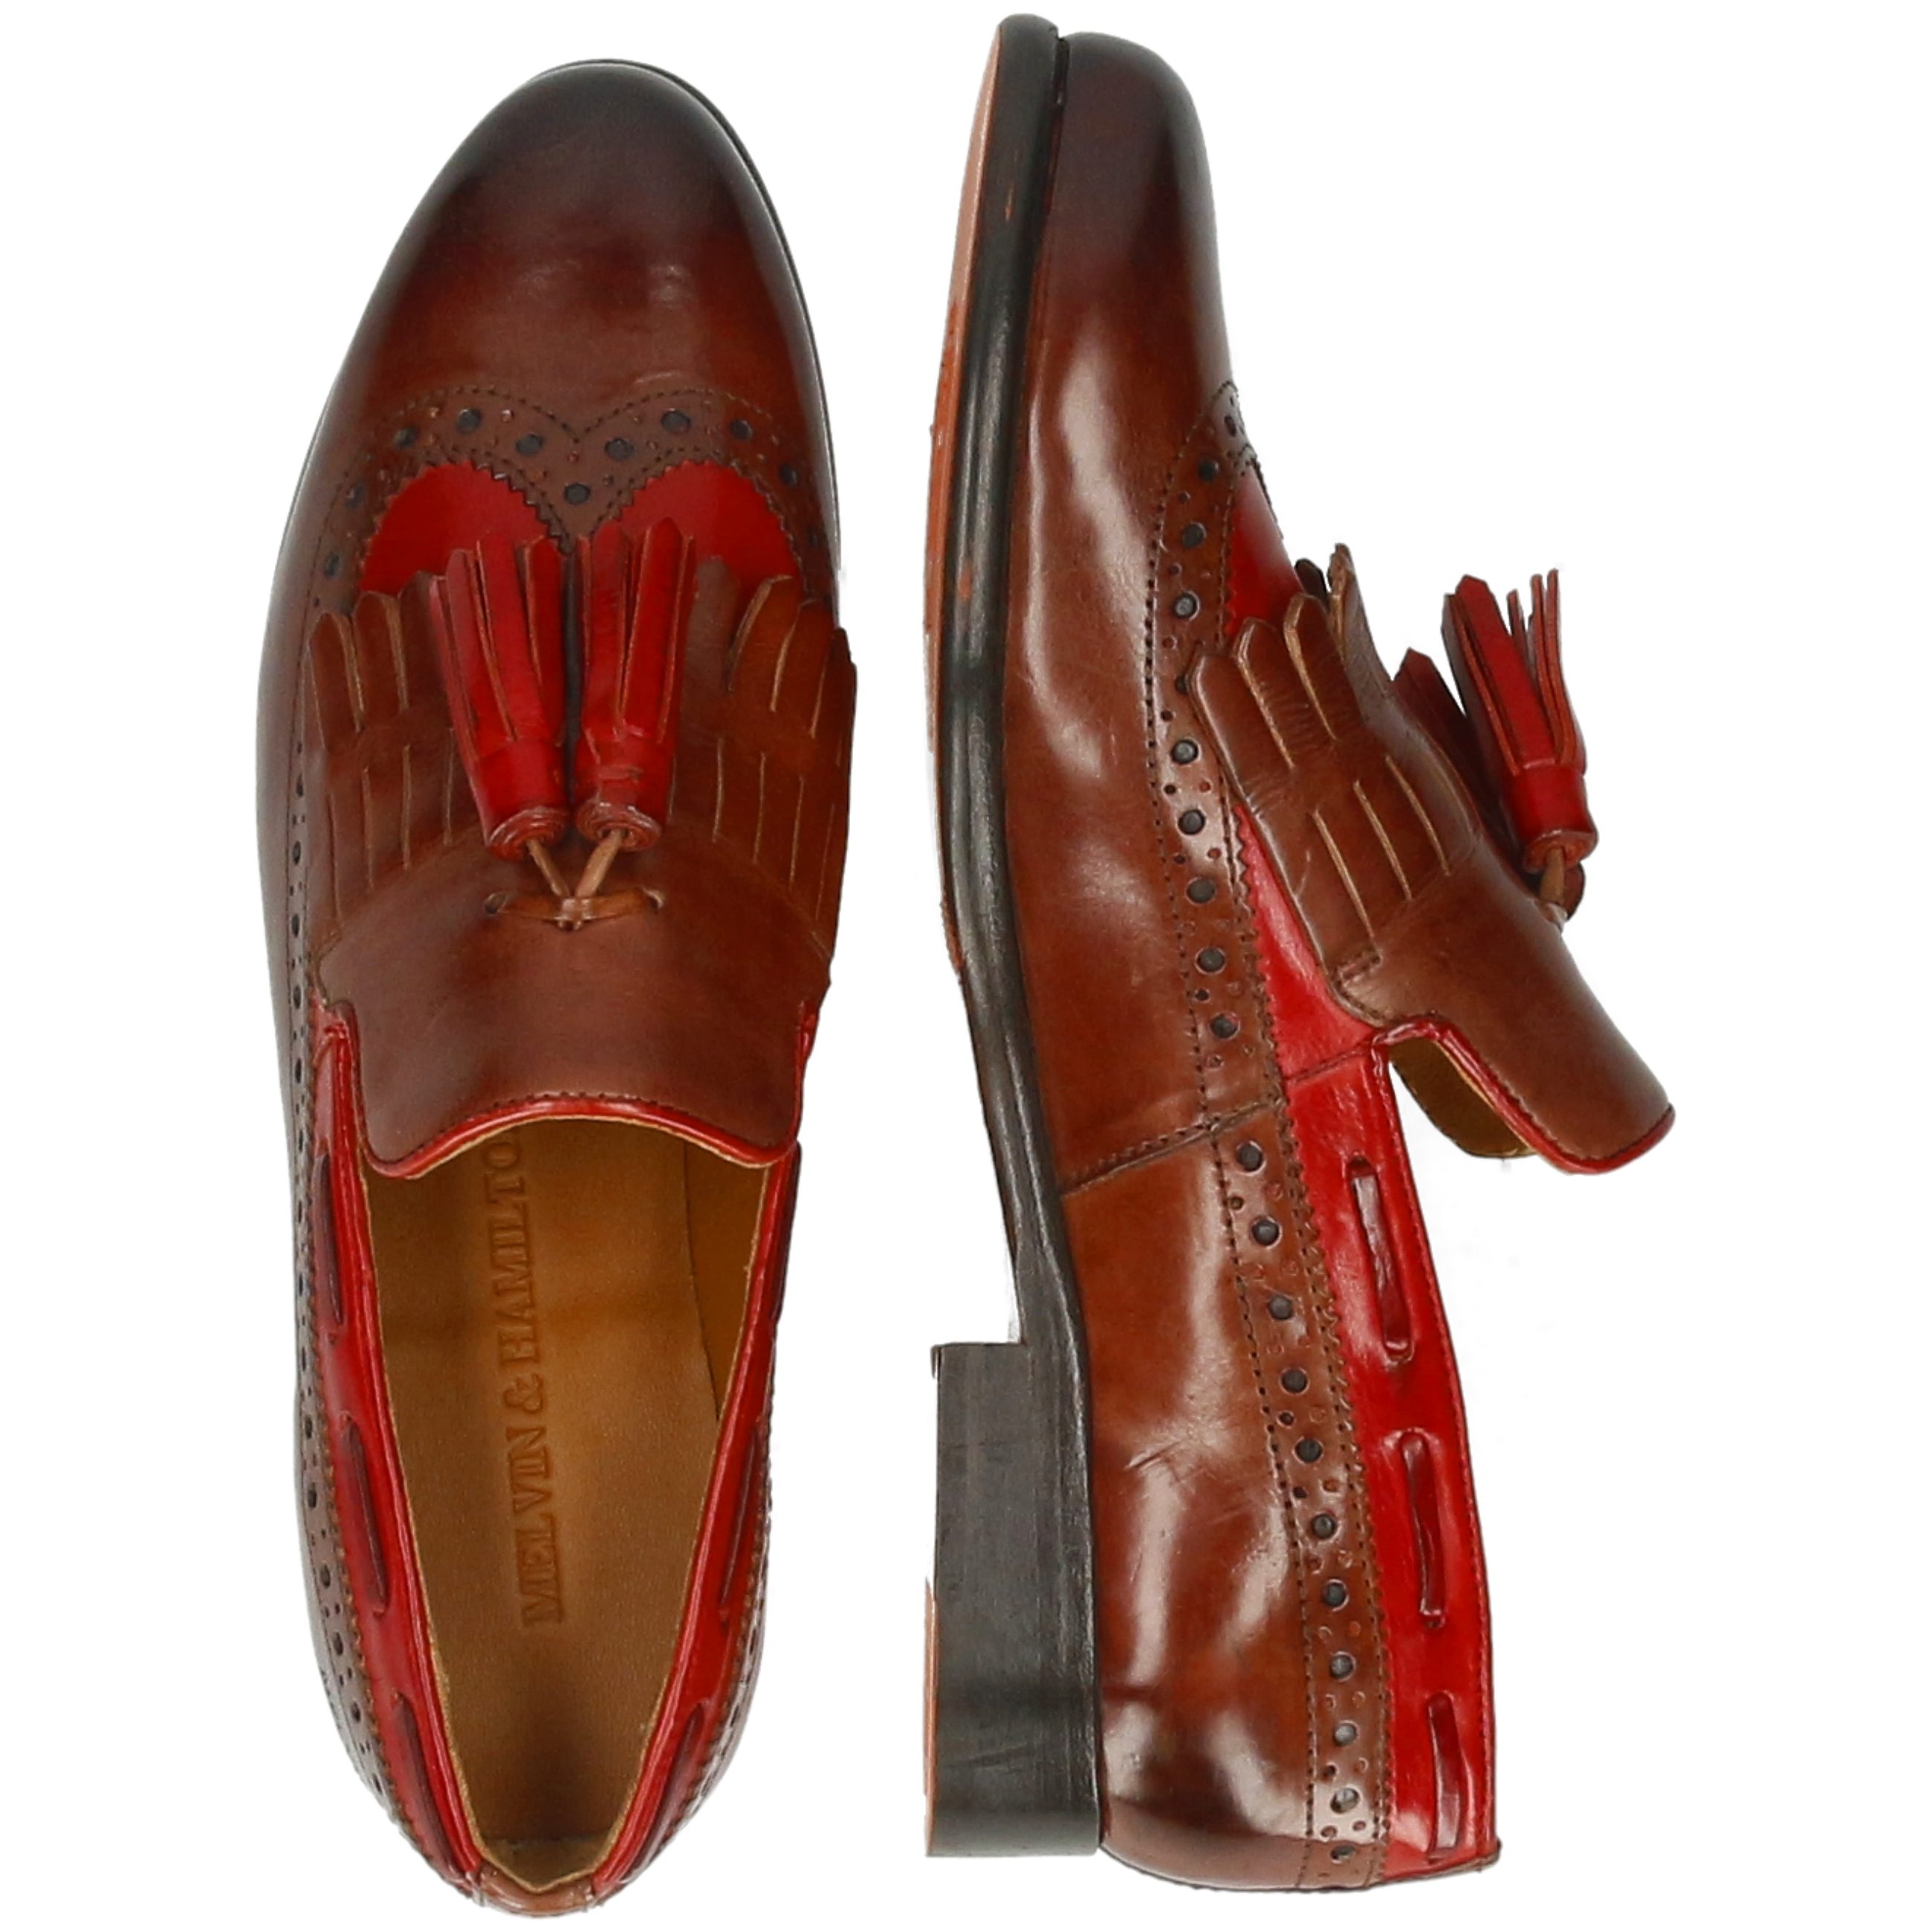 Crust & 3 Melvin Crust Texas Hamilton Loafer Selina Red